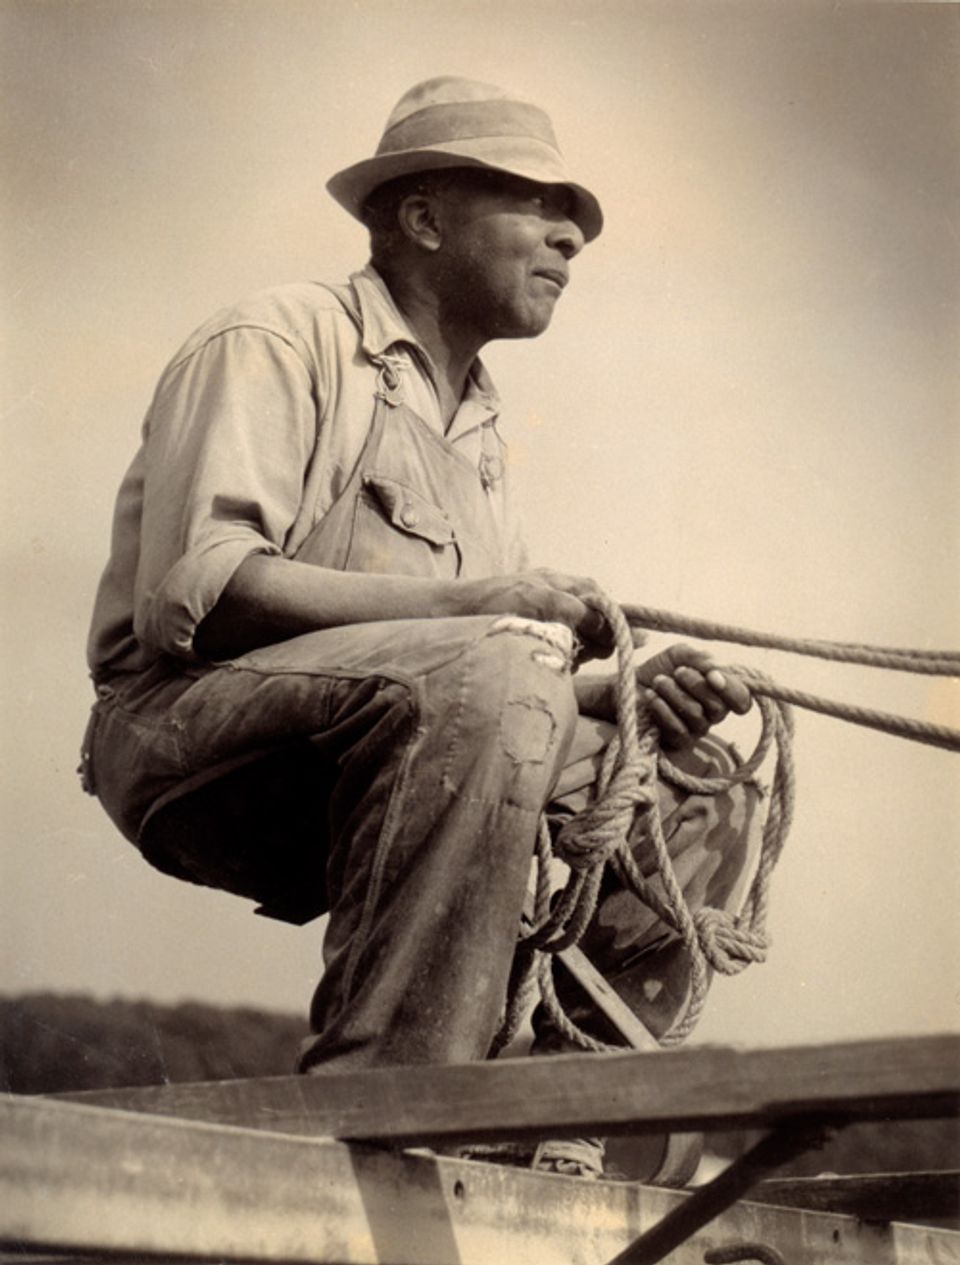 McNeill's gelatin silver print of  man sitting with reins in his hand.